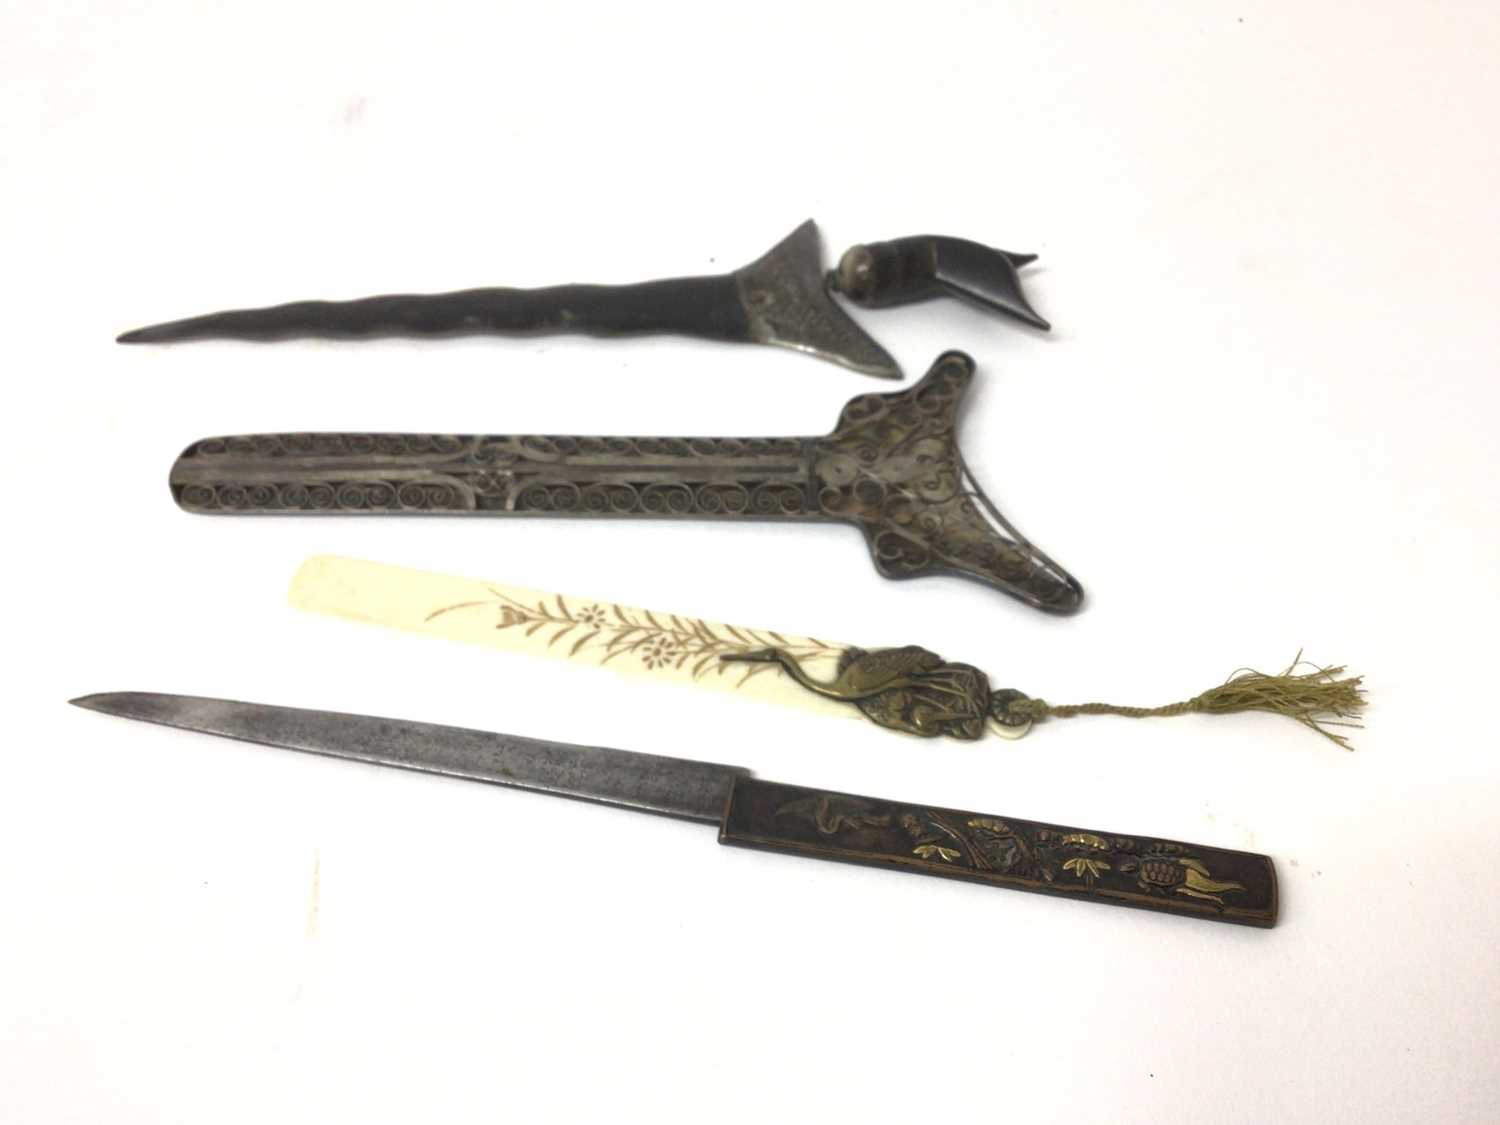 Lot 49 - 19th century Japanese Meiji period knife together with a similar letter opener and a white metal Kris